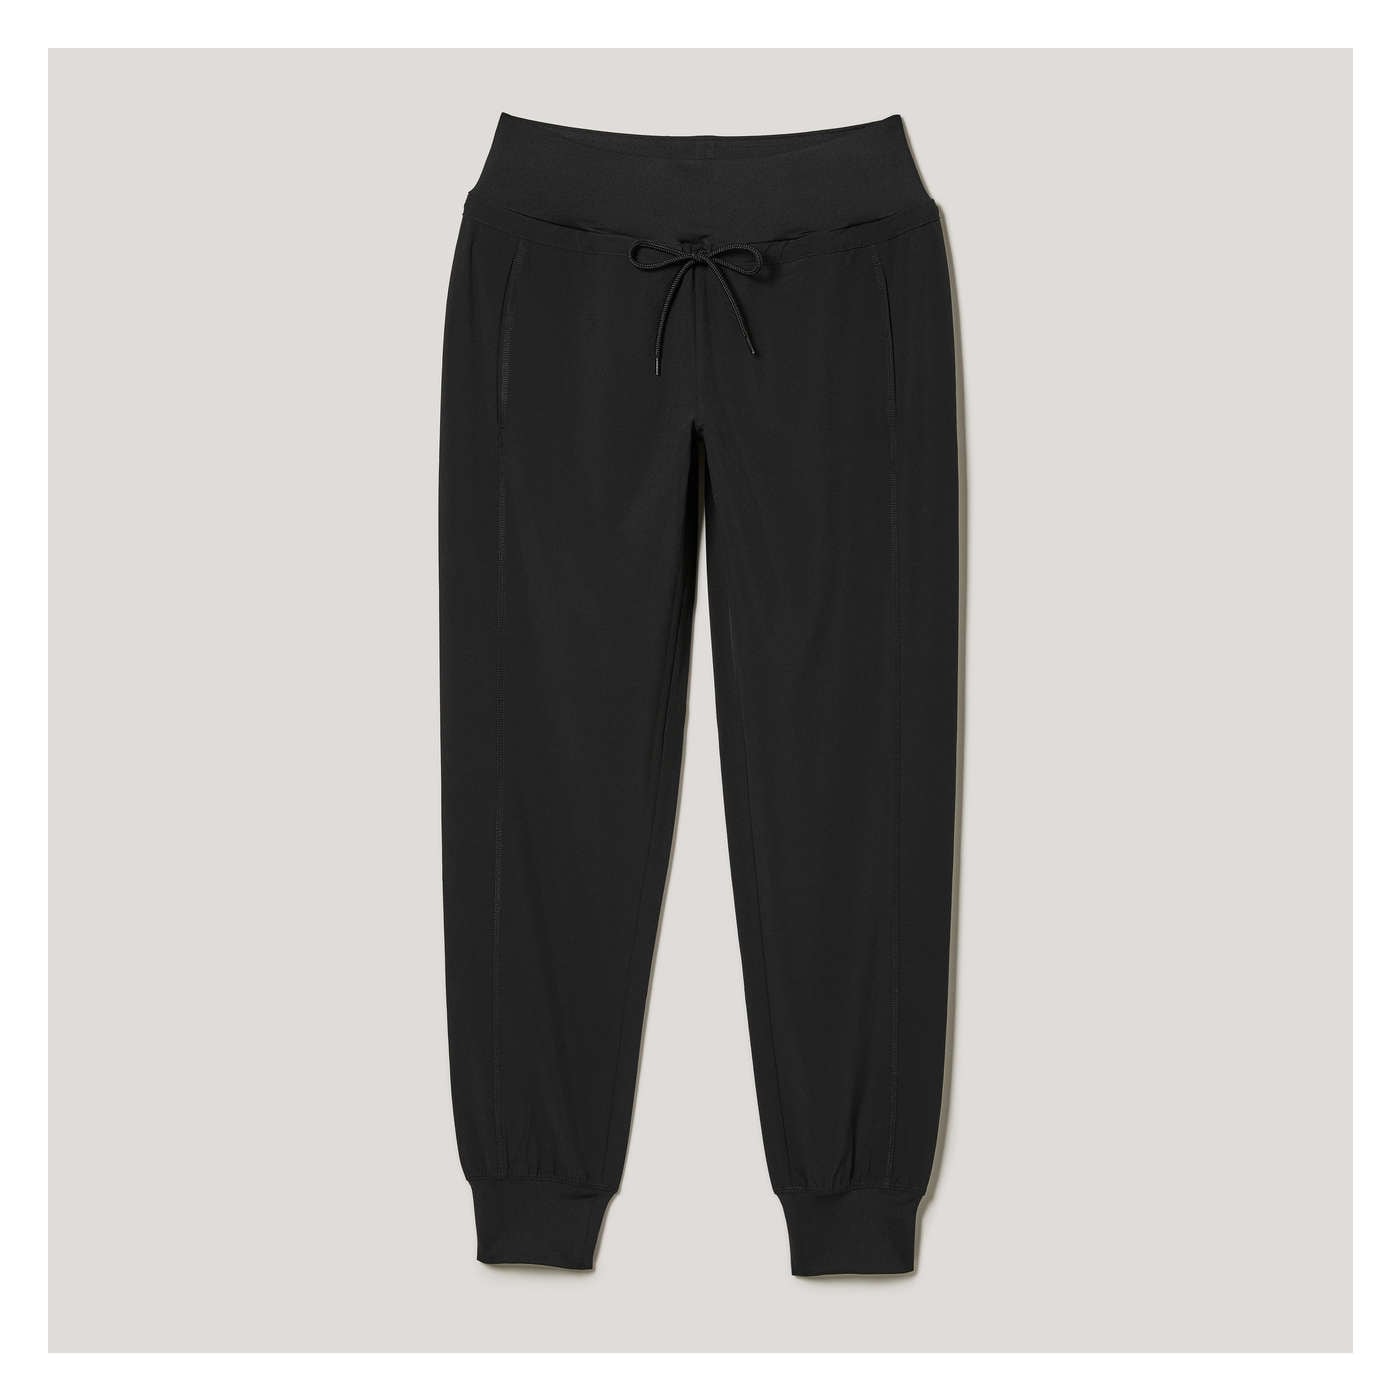 Four-Way Stretch Active Jogger in Black from Joe Fresh